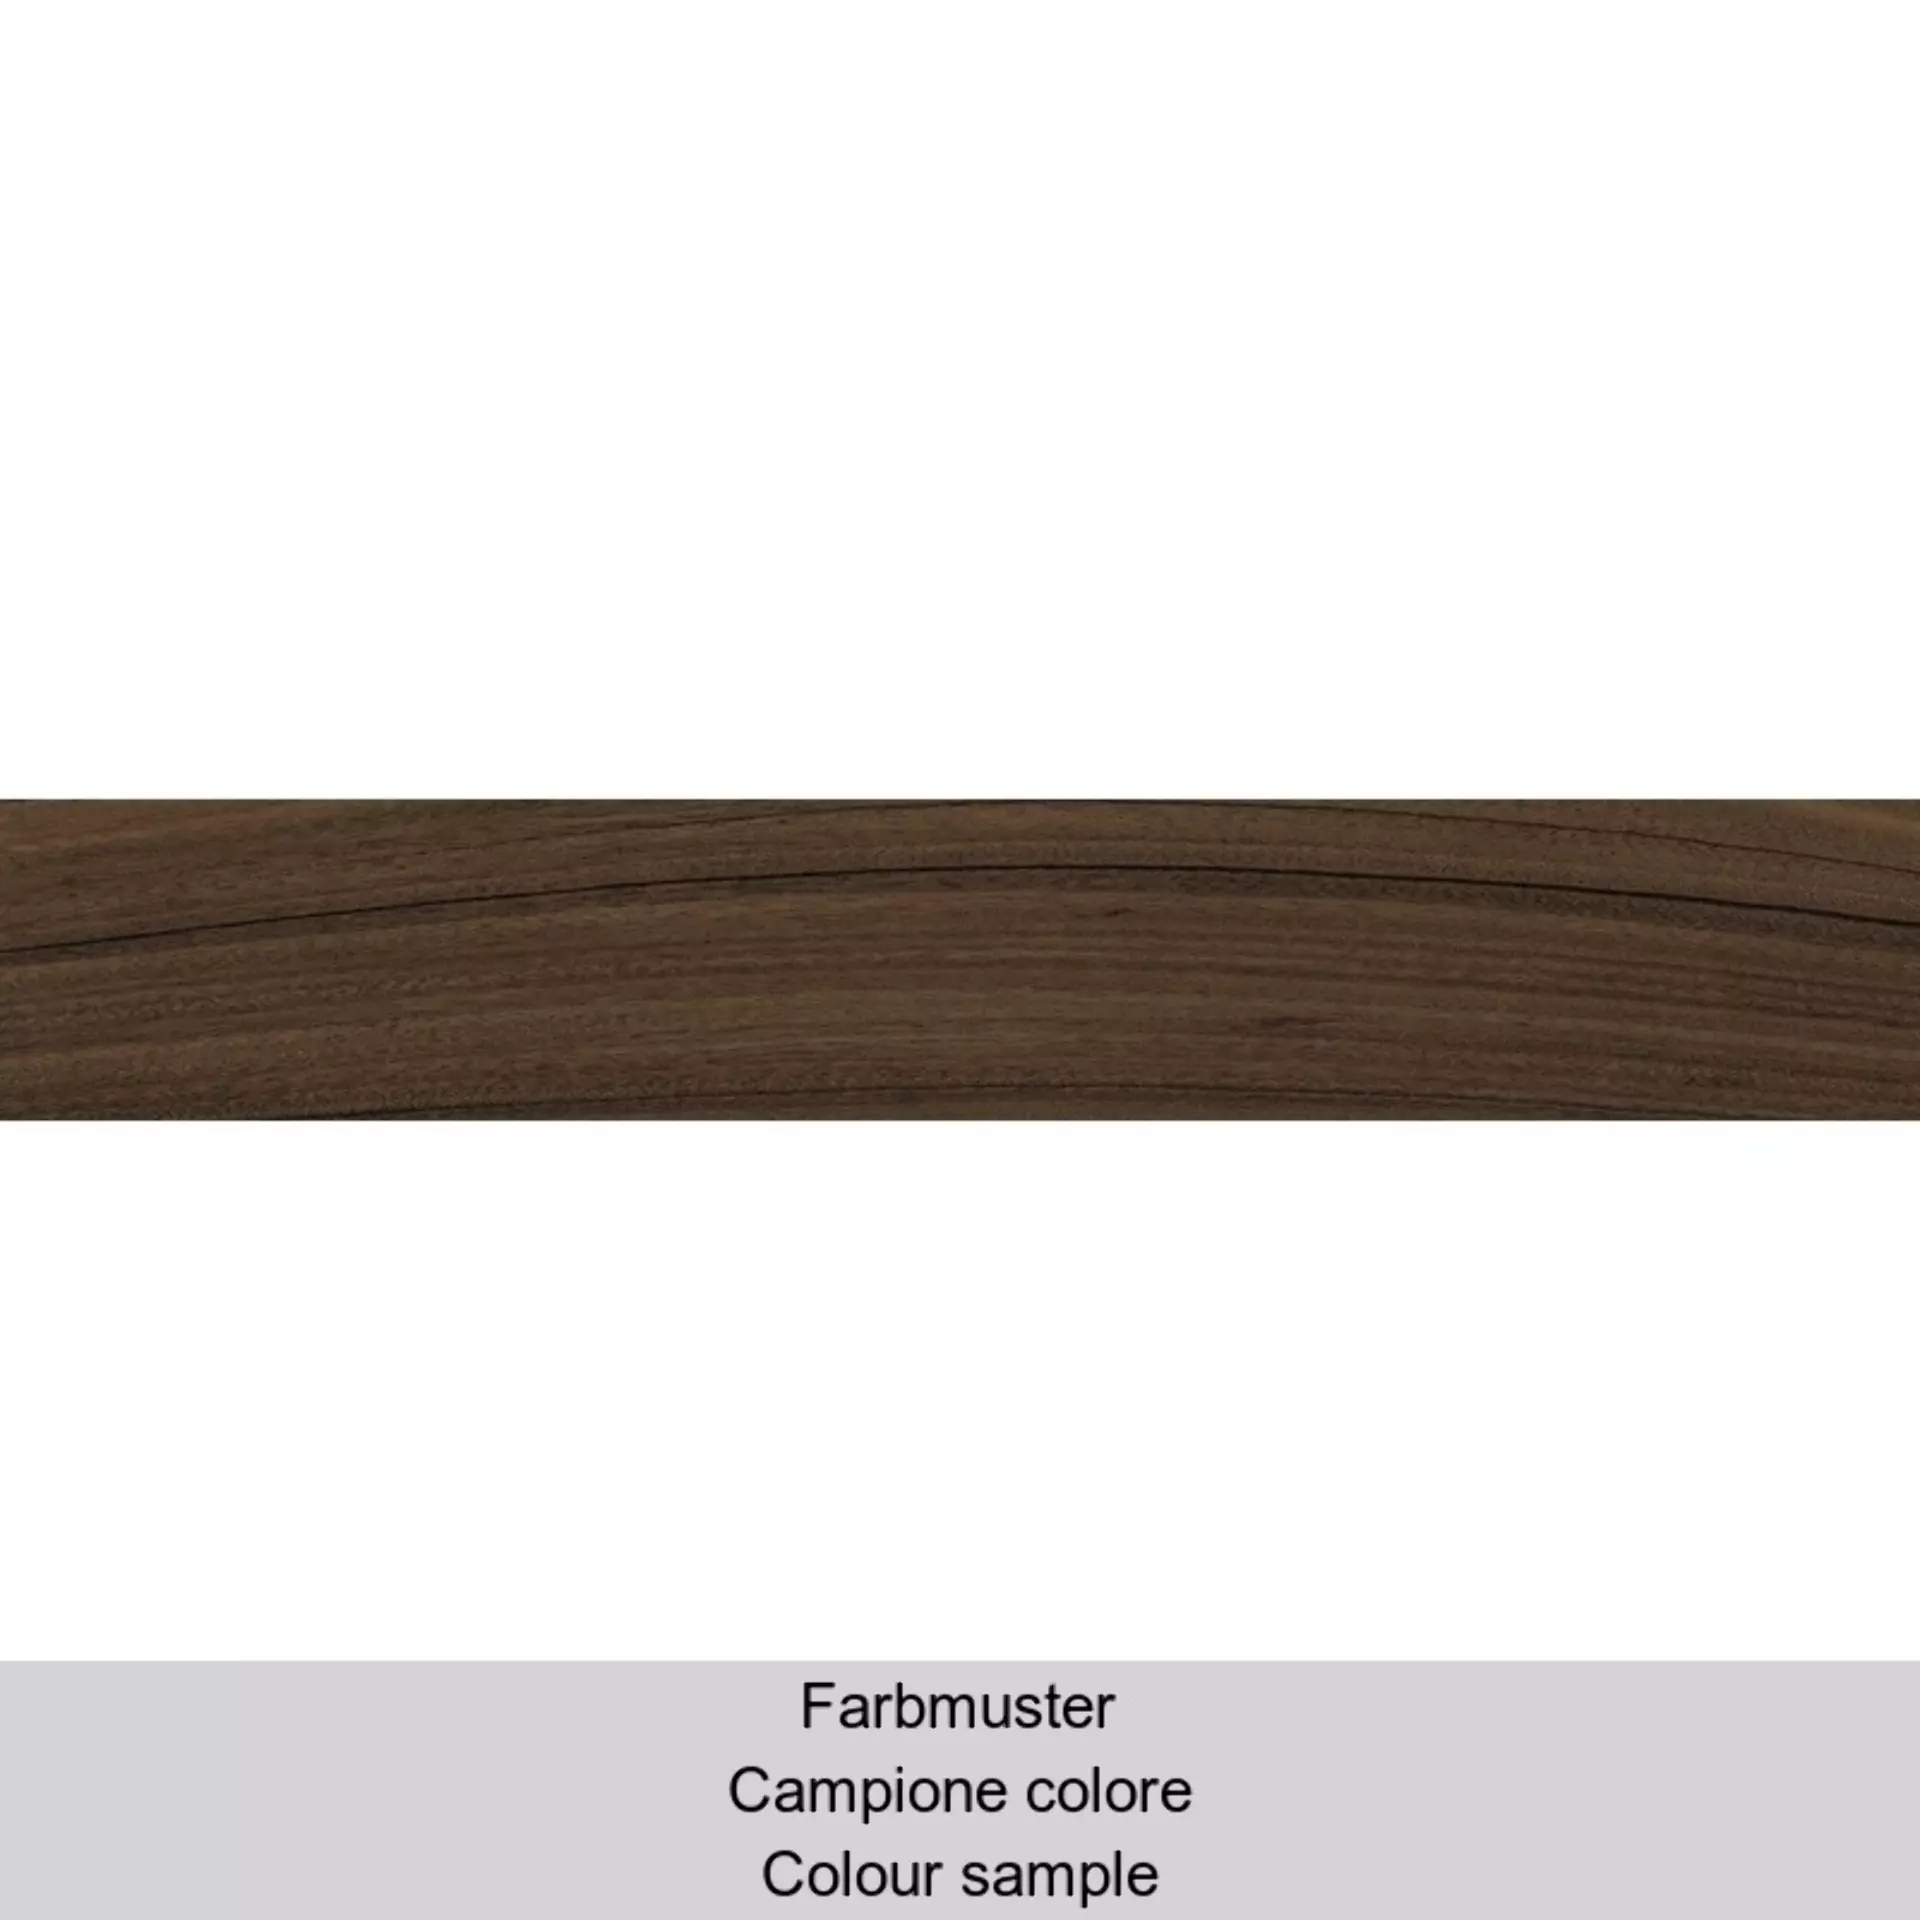 Coem Afromosia Intenso Naturale 0AF217R 25x149,7cm rectified 10mm